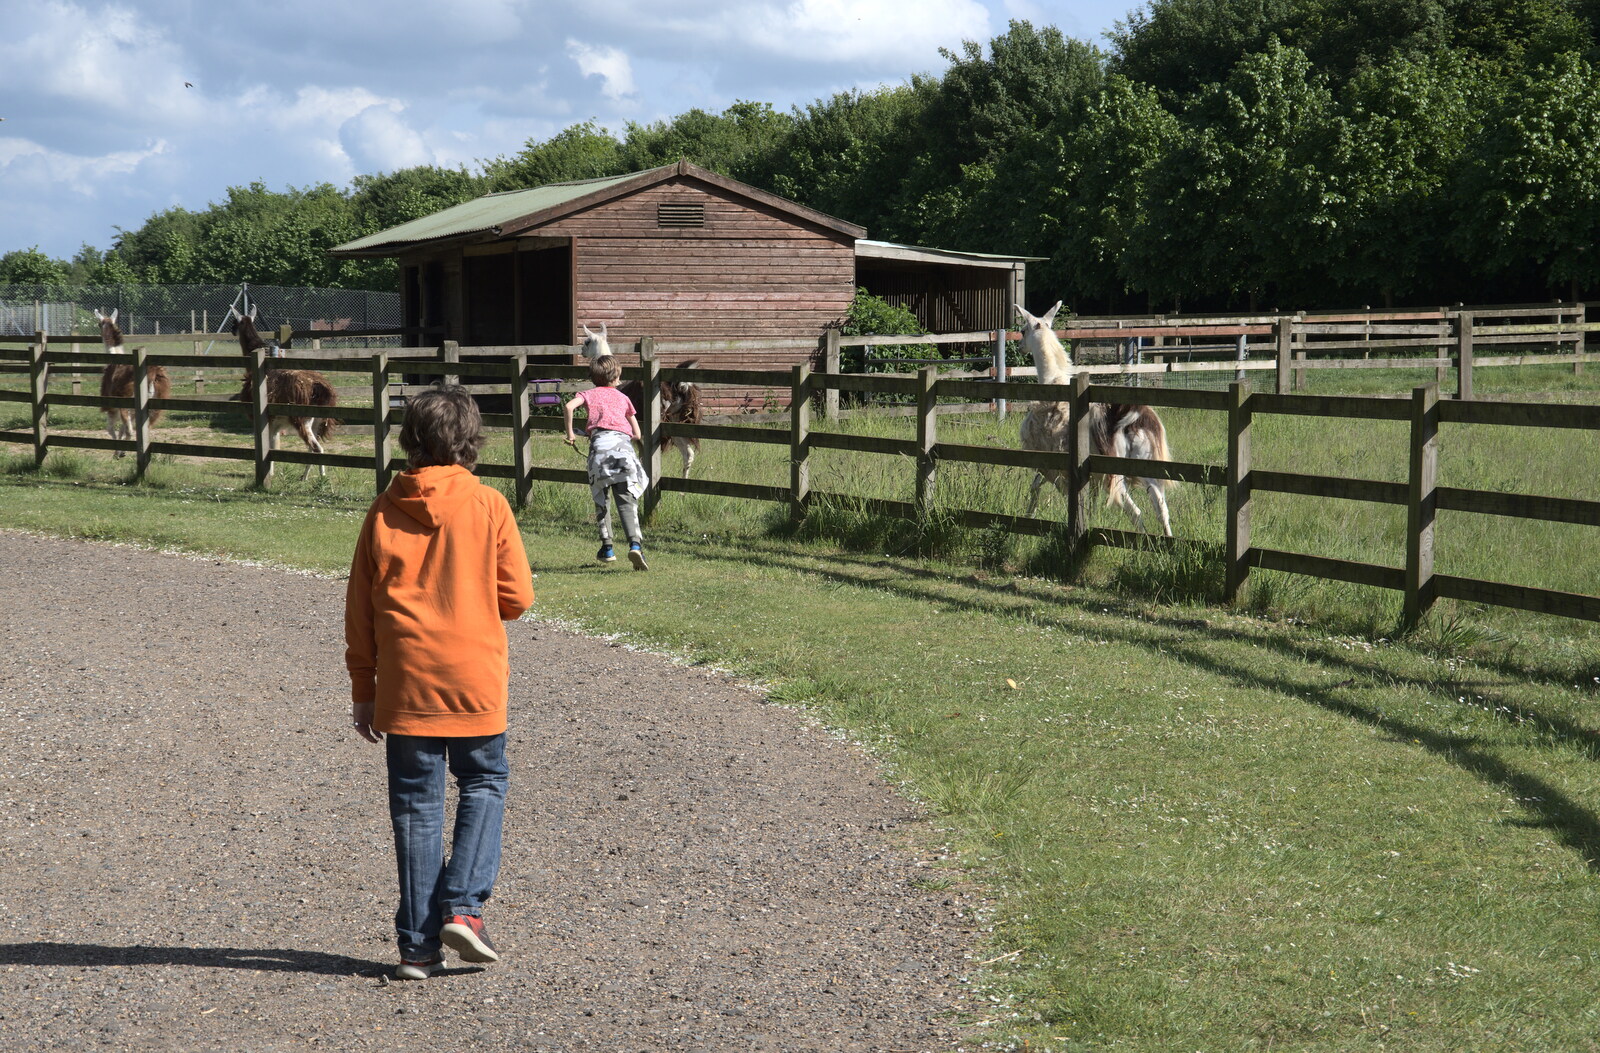 Harry runs after the llamas from A Moth Infestation and a Trip to the Zoo, Banham, Norfolk - 21st May 2022